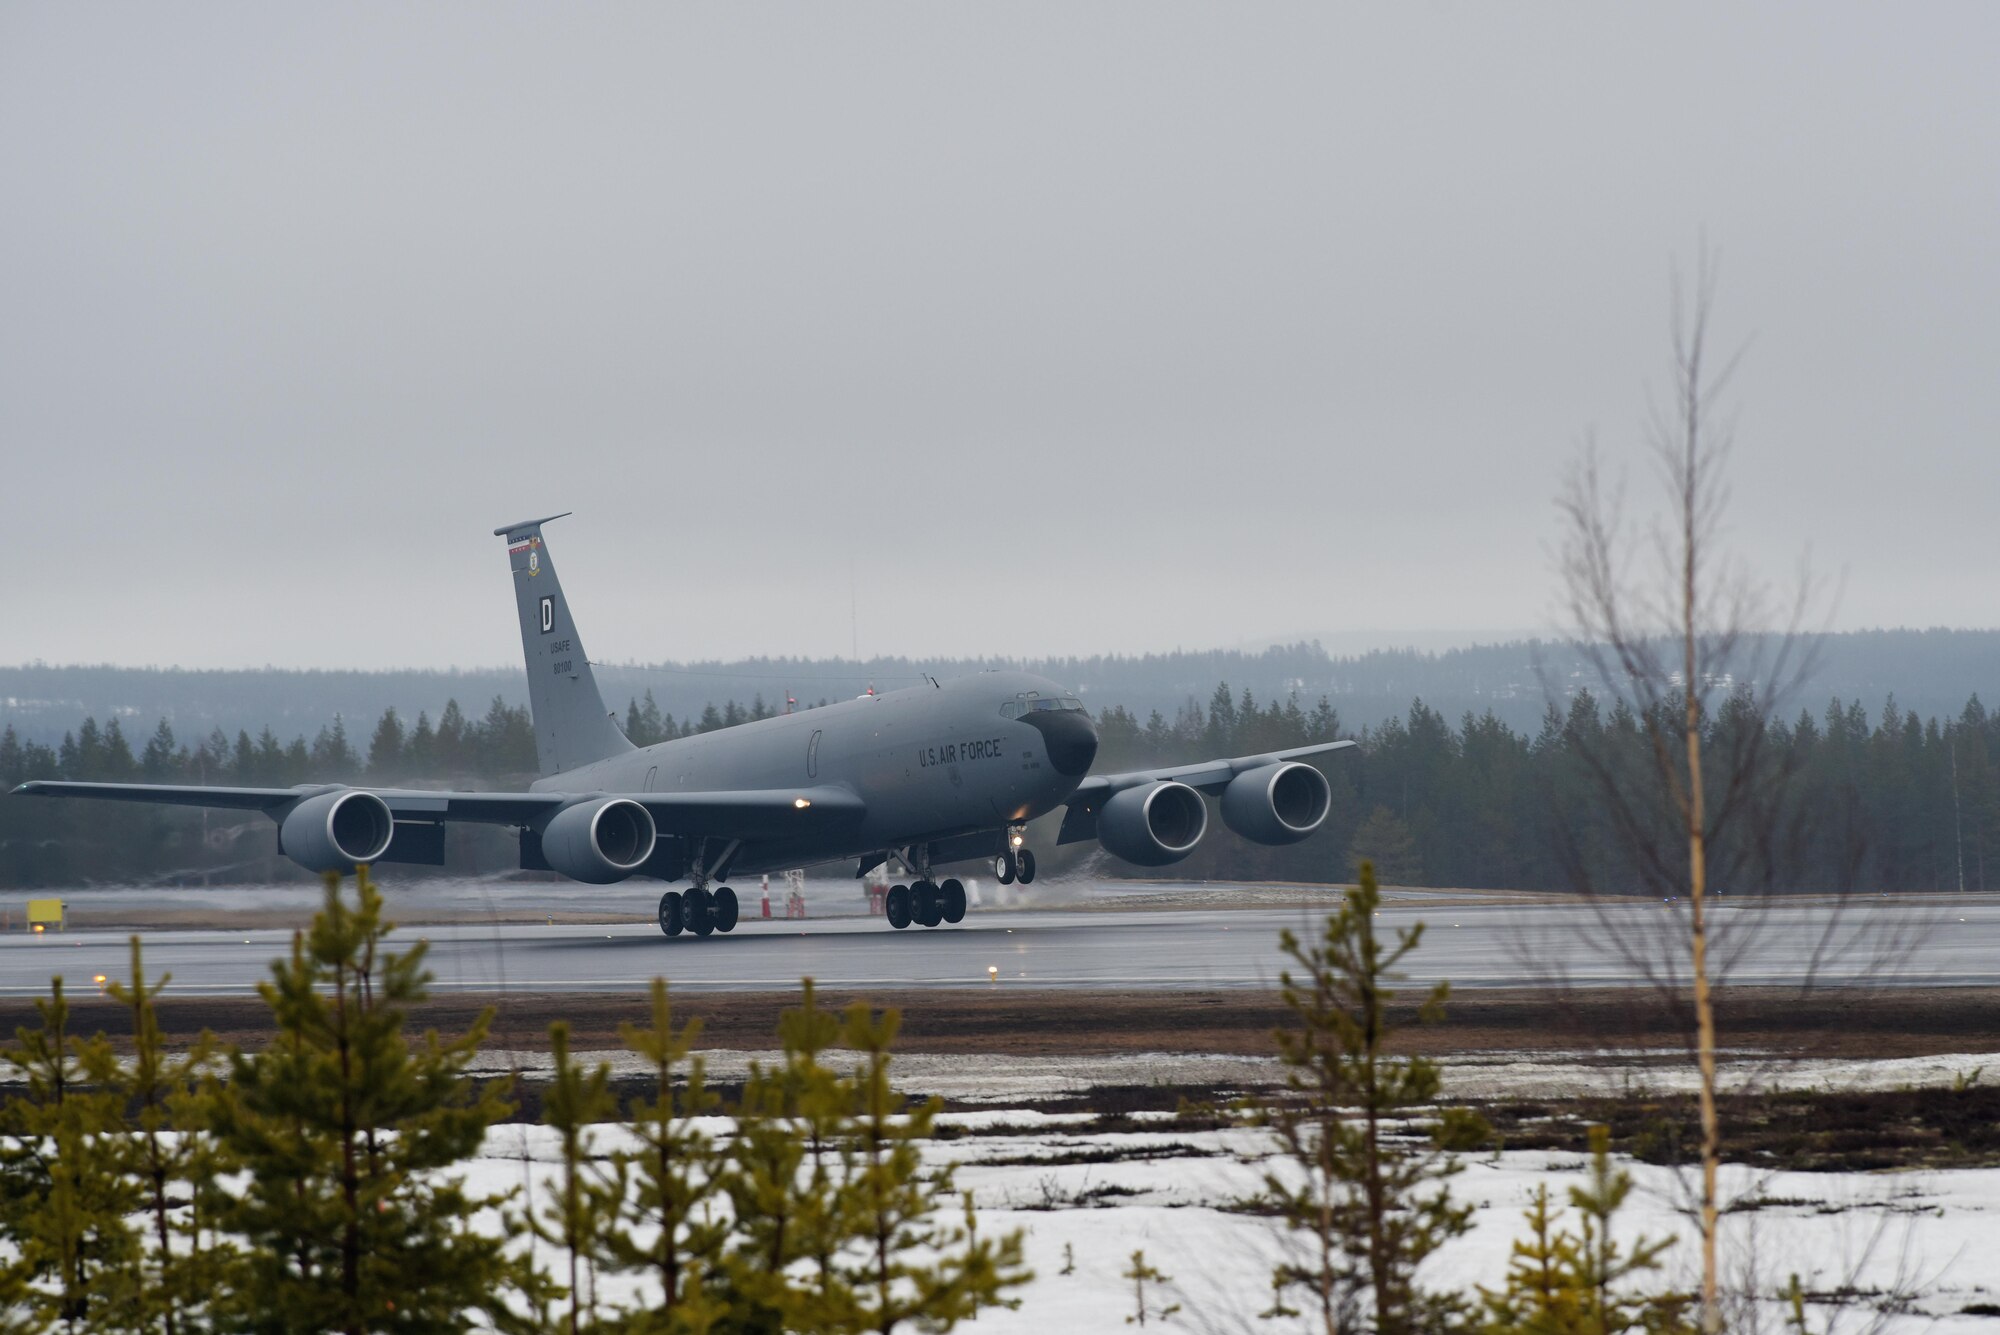 A KC-135 Stratotanker from Royal Air Force Mildenhall, England, lands at Rovaniemi Air Base, Finland, May 17. Personnel and aircraft from RAFs Mildenhall and Lakenheath deployed to bases in Finland and Sweden for Arctic Challenge 2017, a multinational training exercise aimed at maintaining the relationships and trust essential for ensuring regional security. (U.S. Air Force photo/Airman 1st Class Abby L. Finkel)